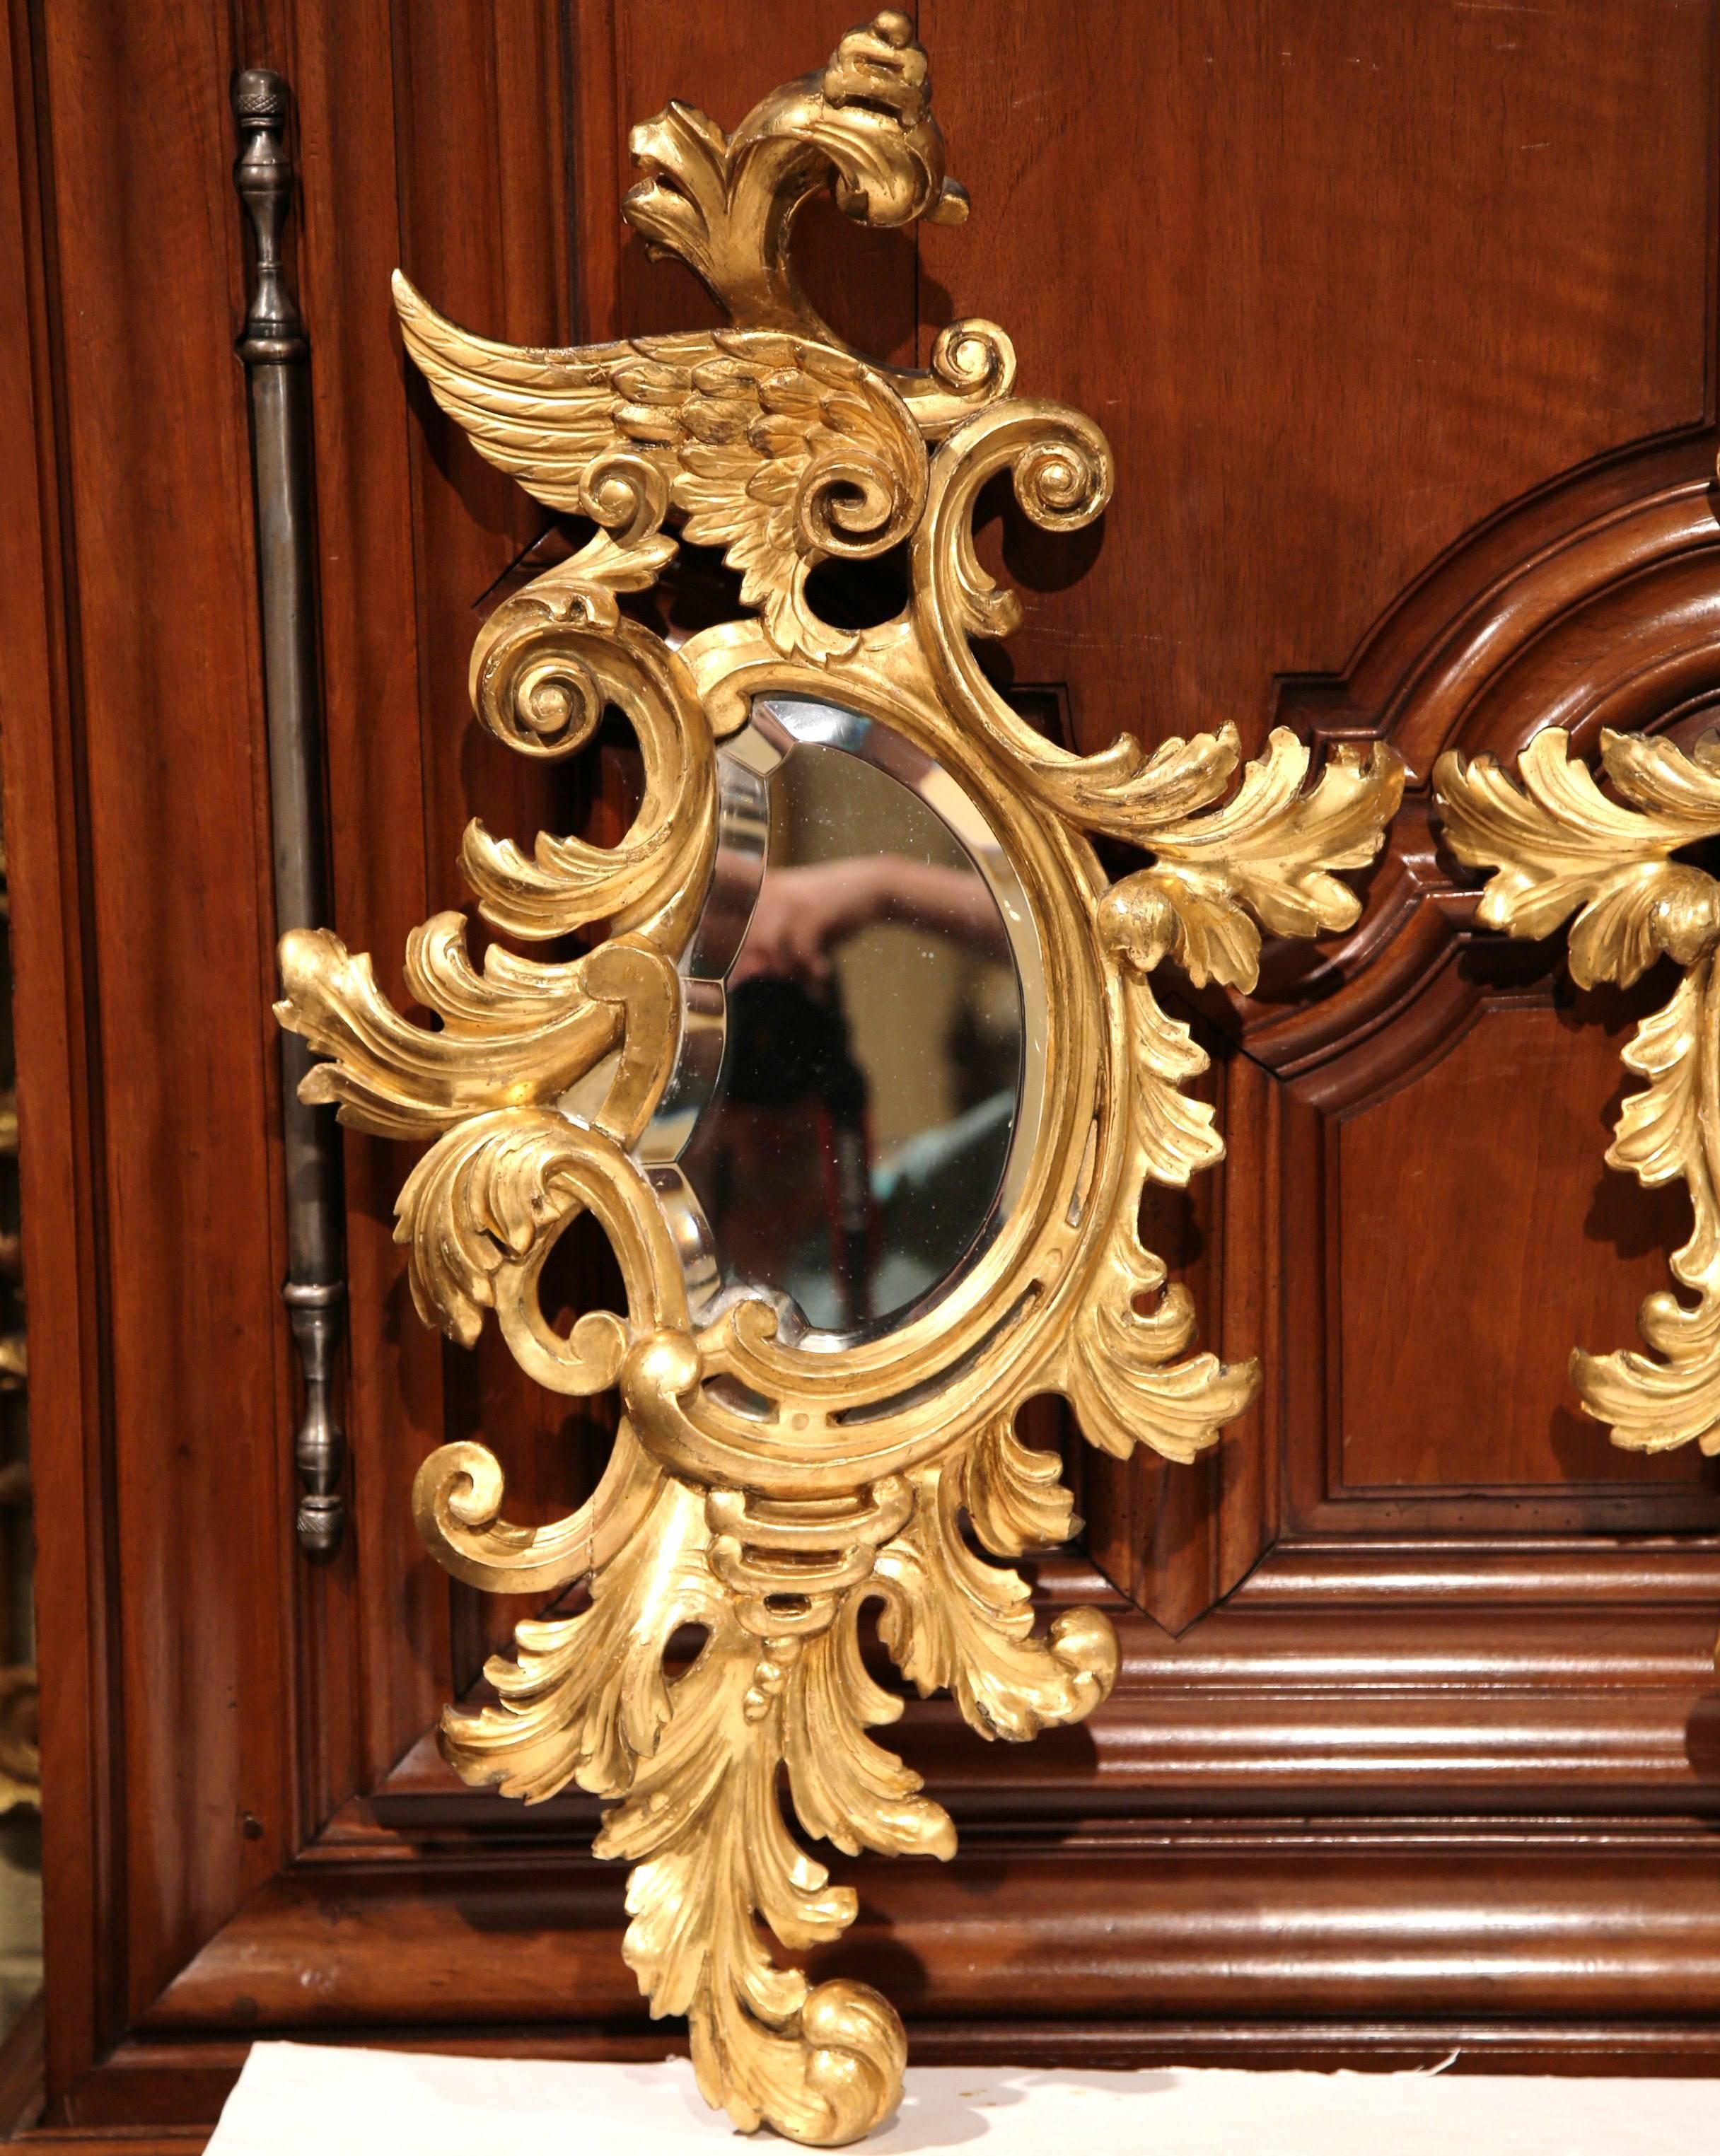 This beautiful pair of tall antique wall hanging mirrors was created in France, circa 1860. Both mirrors are set inside a cartouche shaped frame that feature hand-carved leaves and wings with their original gold leaf finish. The beveled glass is in